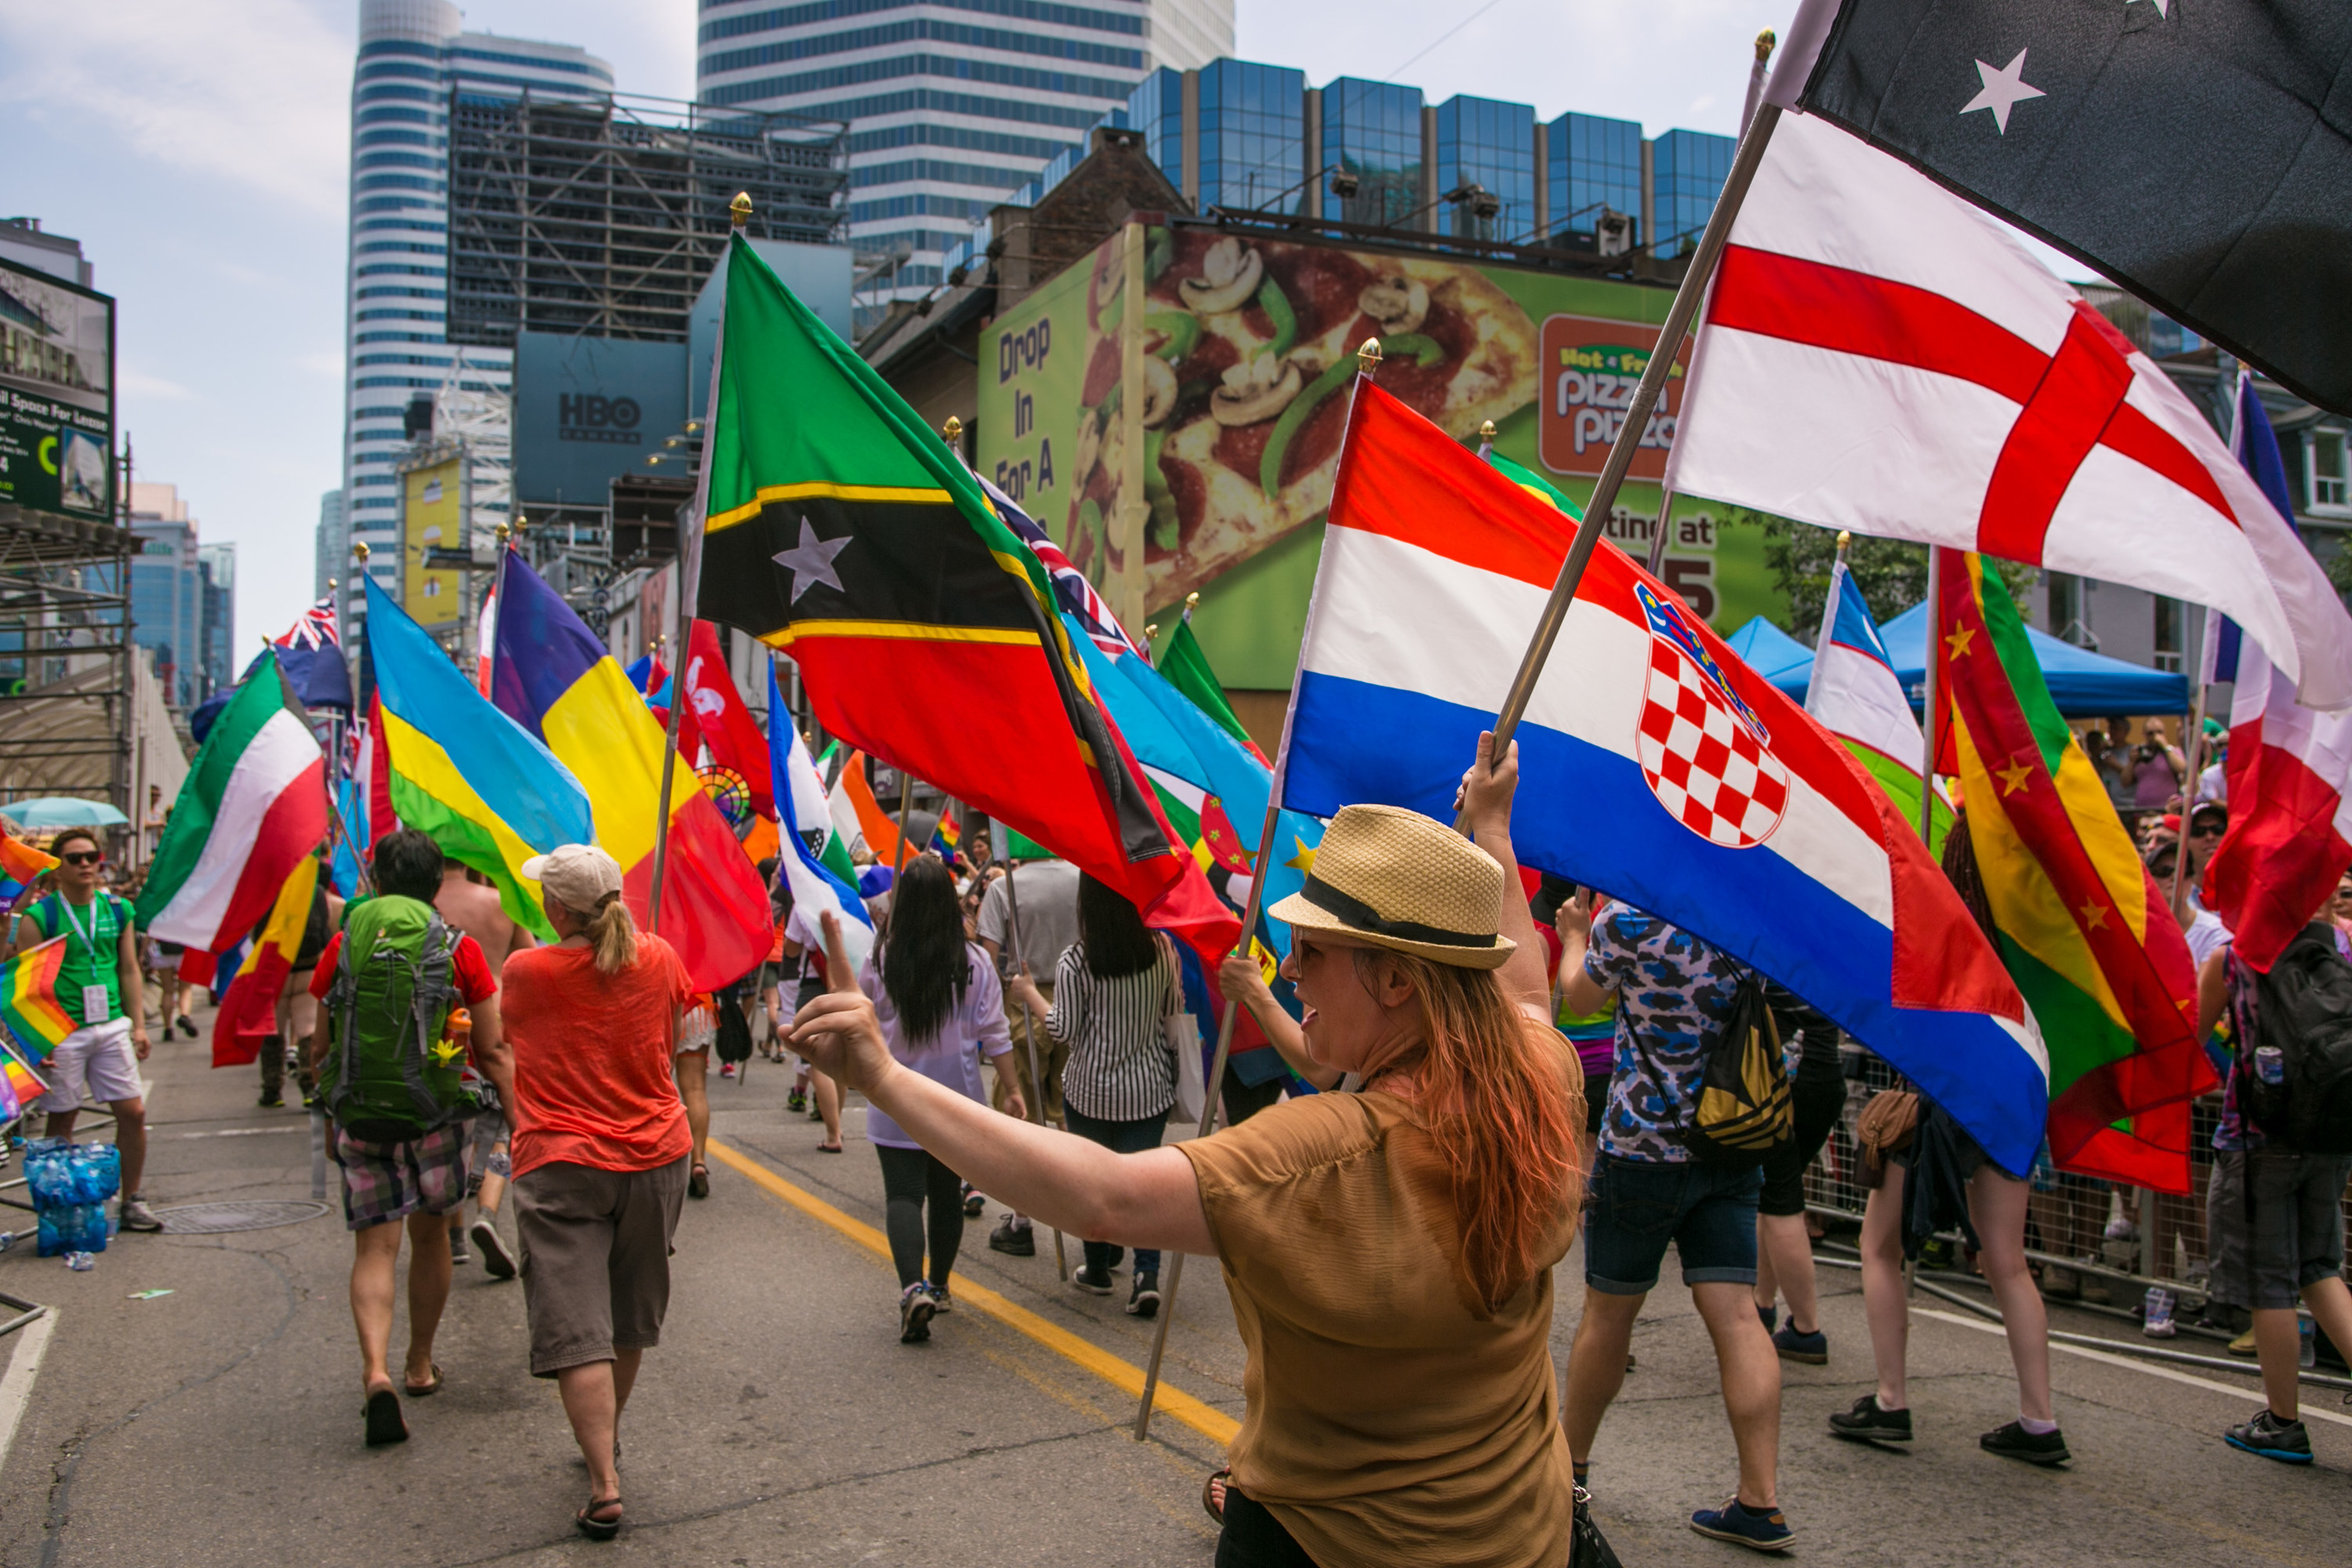 People carry international flags during World Pride in Toronto